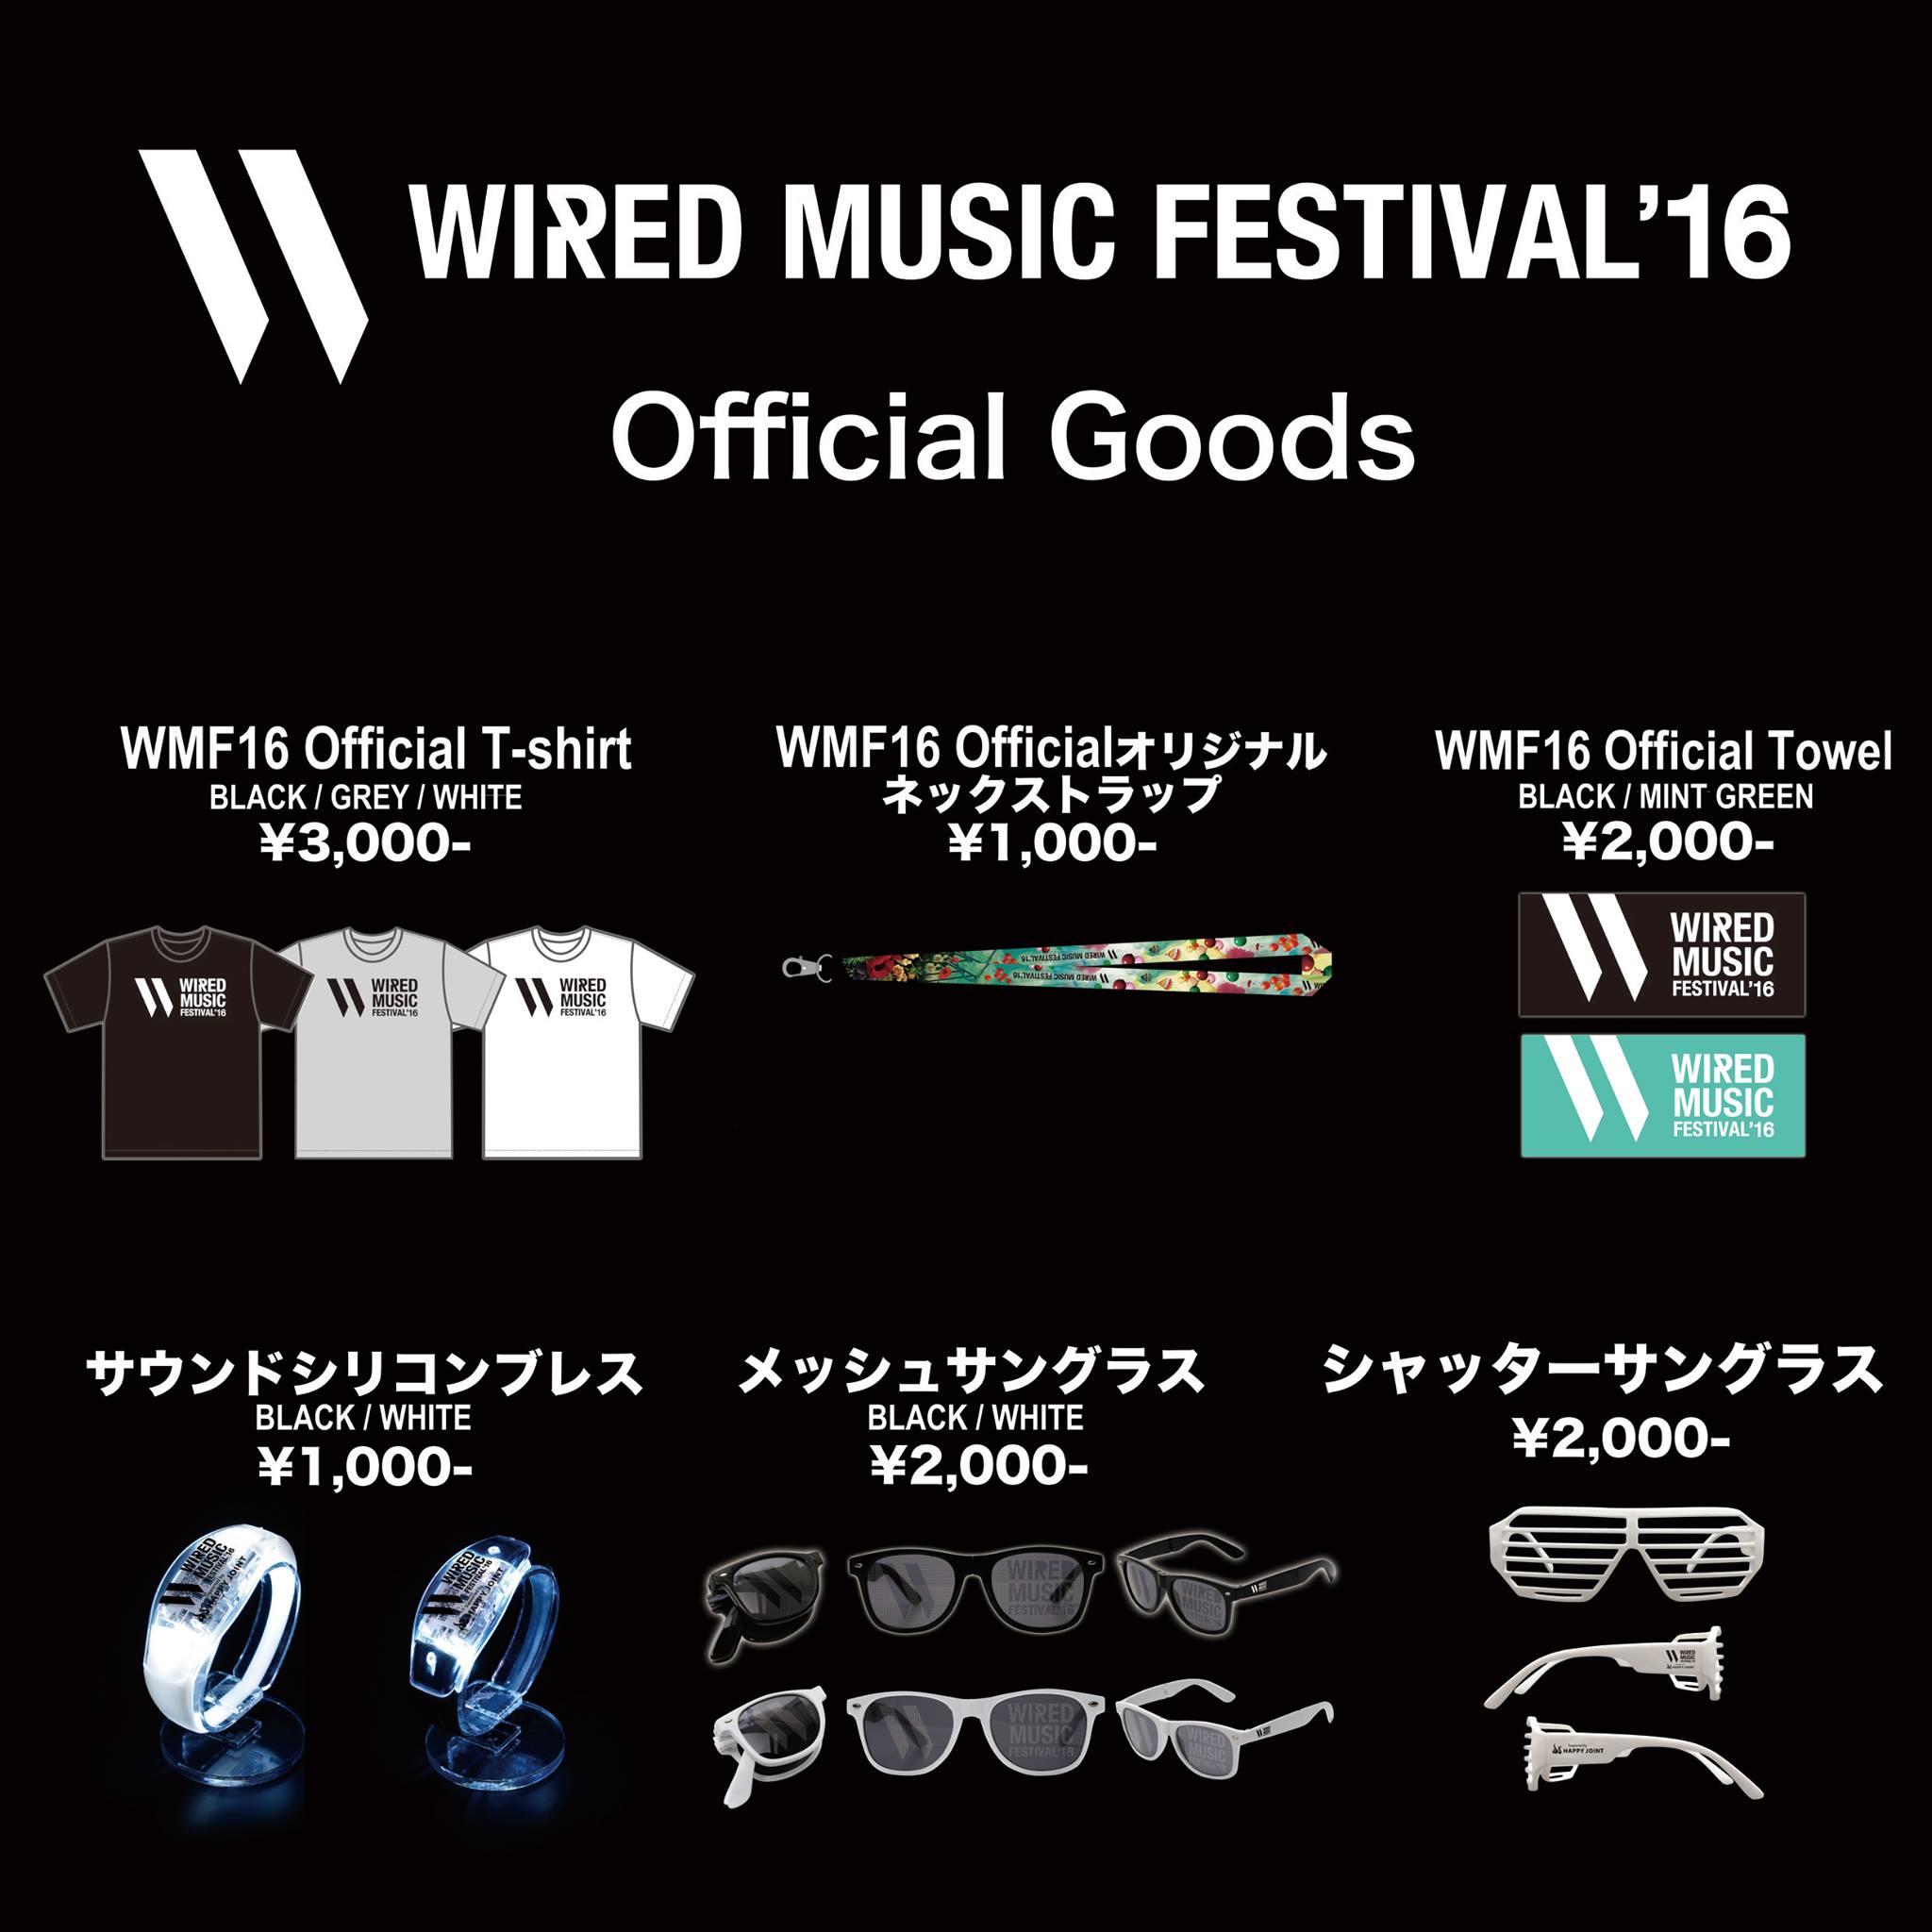 WIRED MUSIC FESTIVAL 2016 goods